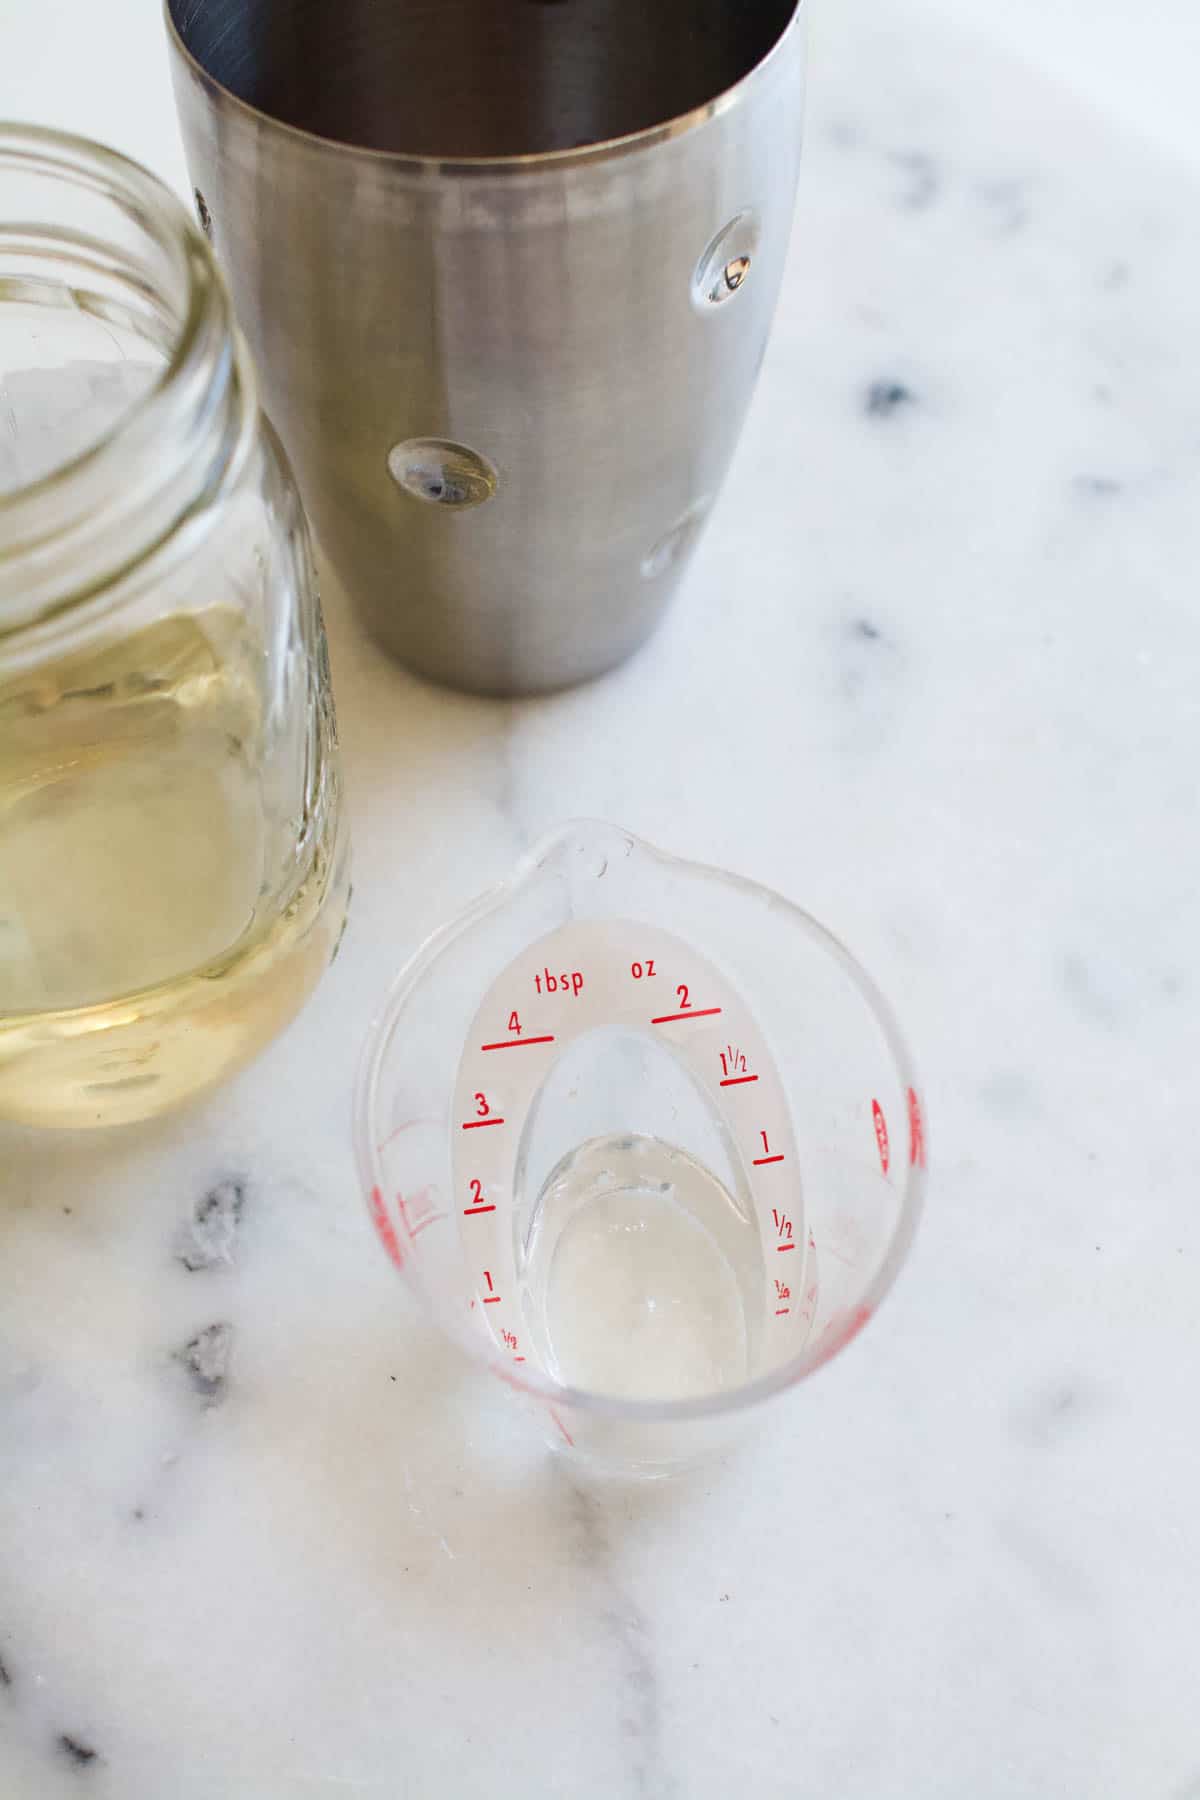 A measuring cup with simple syrup on a counter next to a jar of syrup and a cocktail shaker.